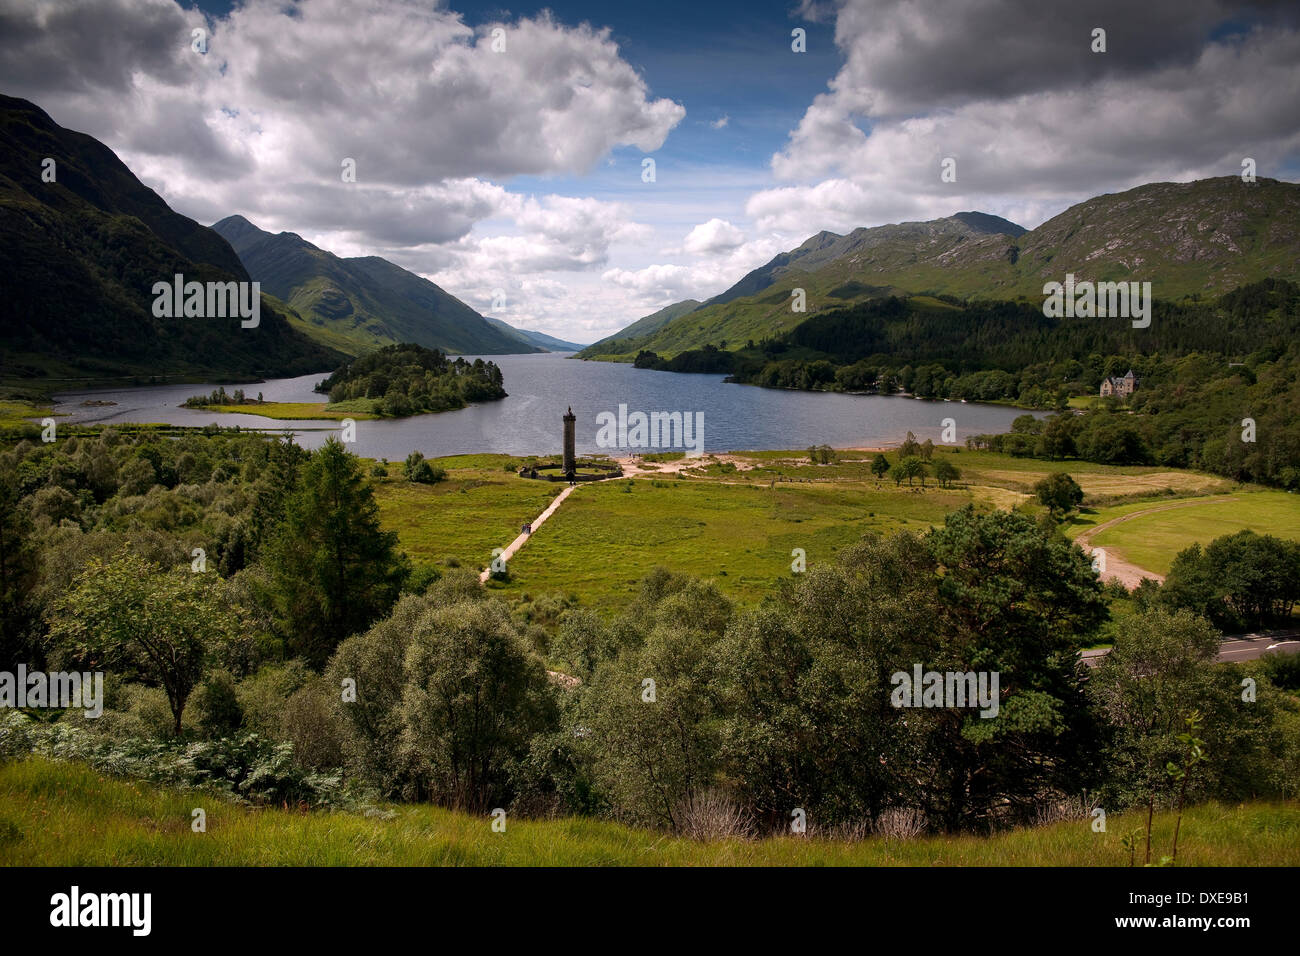 View overlooking the Glenfinnan Jacobite 1745 monument, Loch Shiel Stock Photo